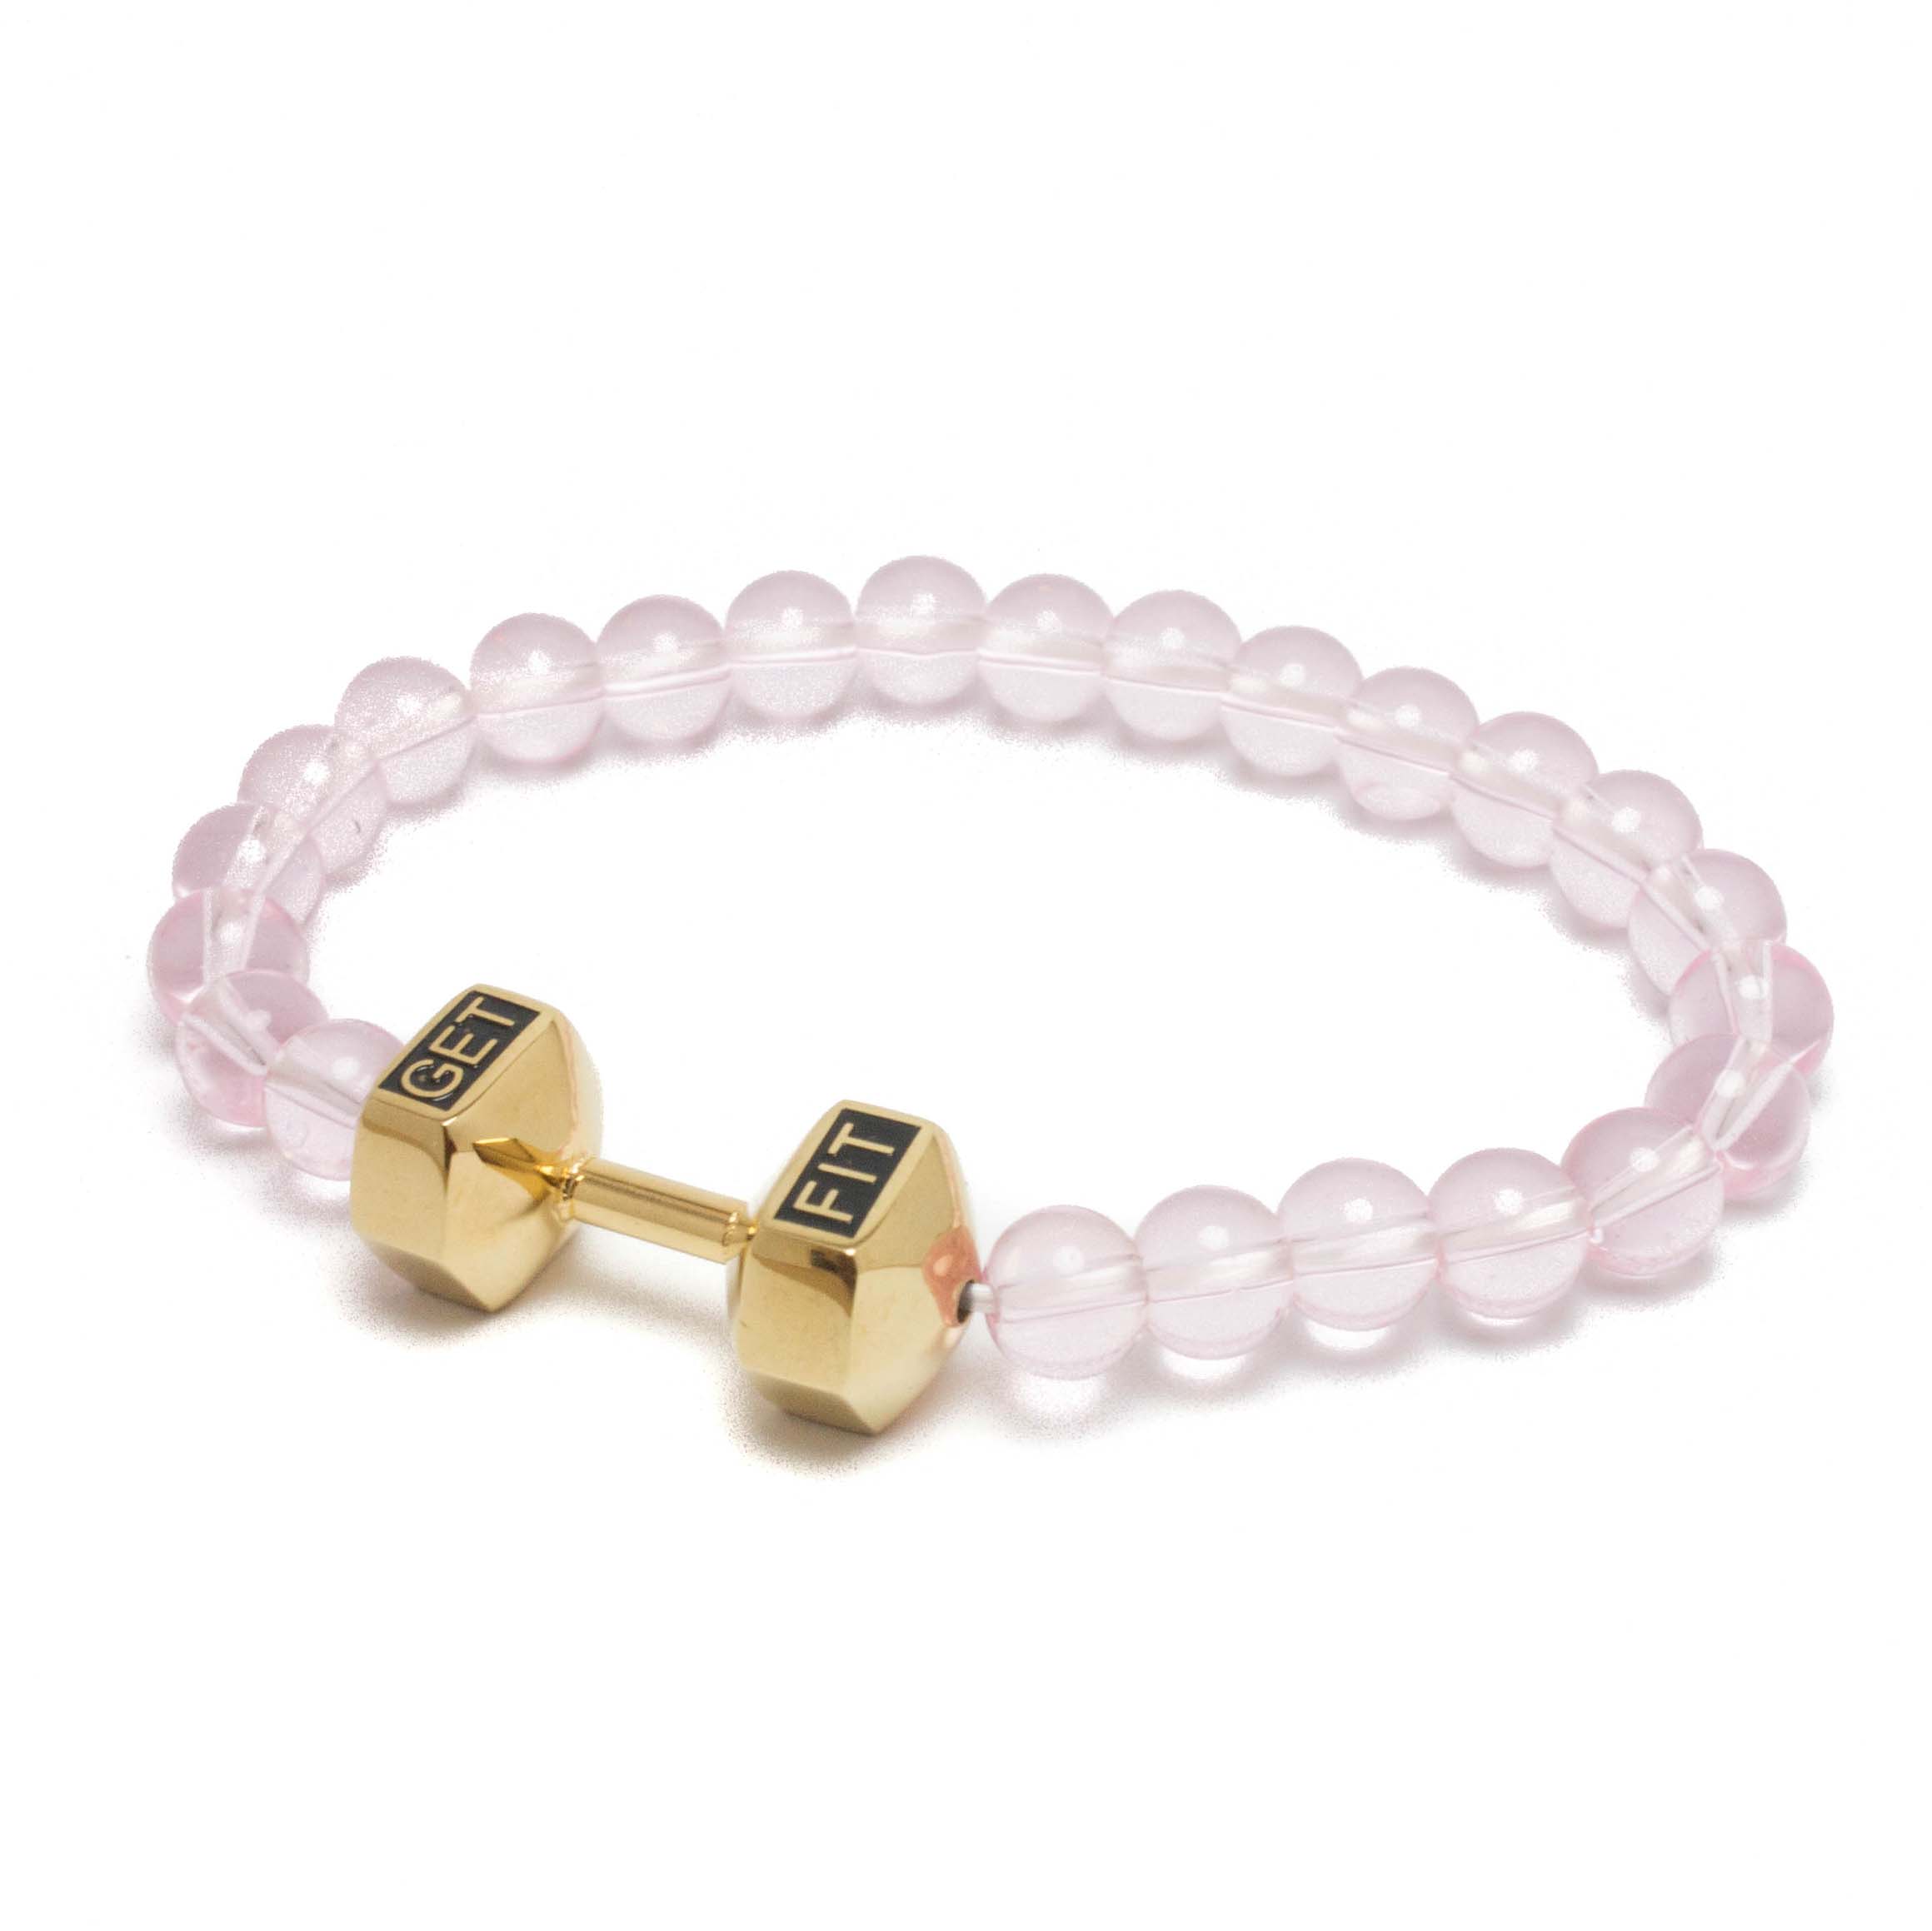 Gold Dumbbell Bracelet with Pink Beads | GETFIT